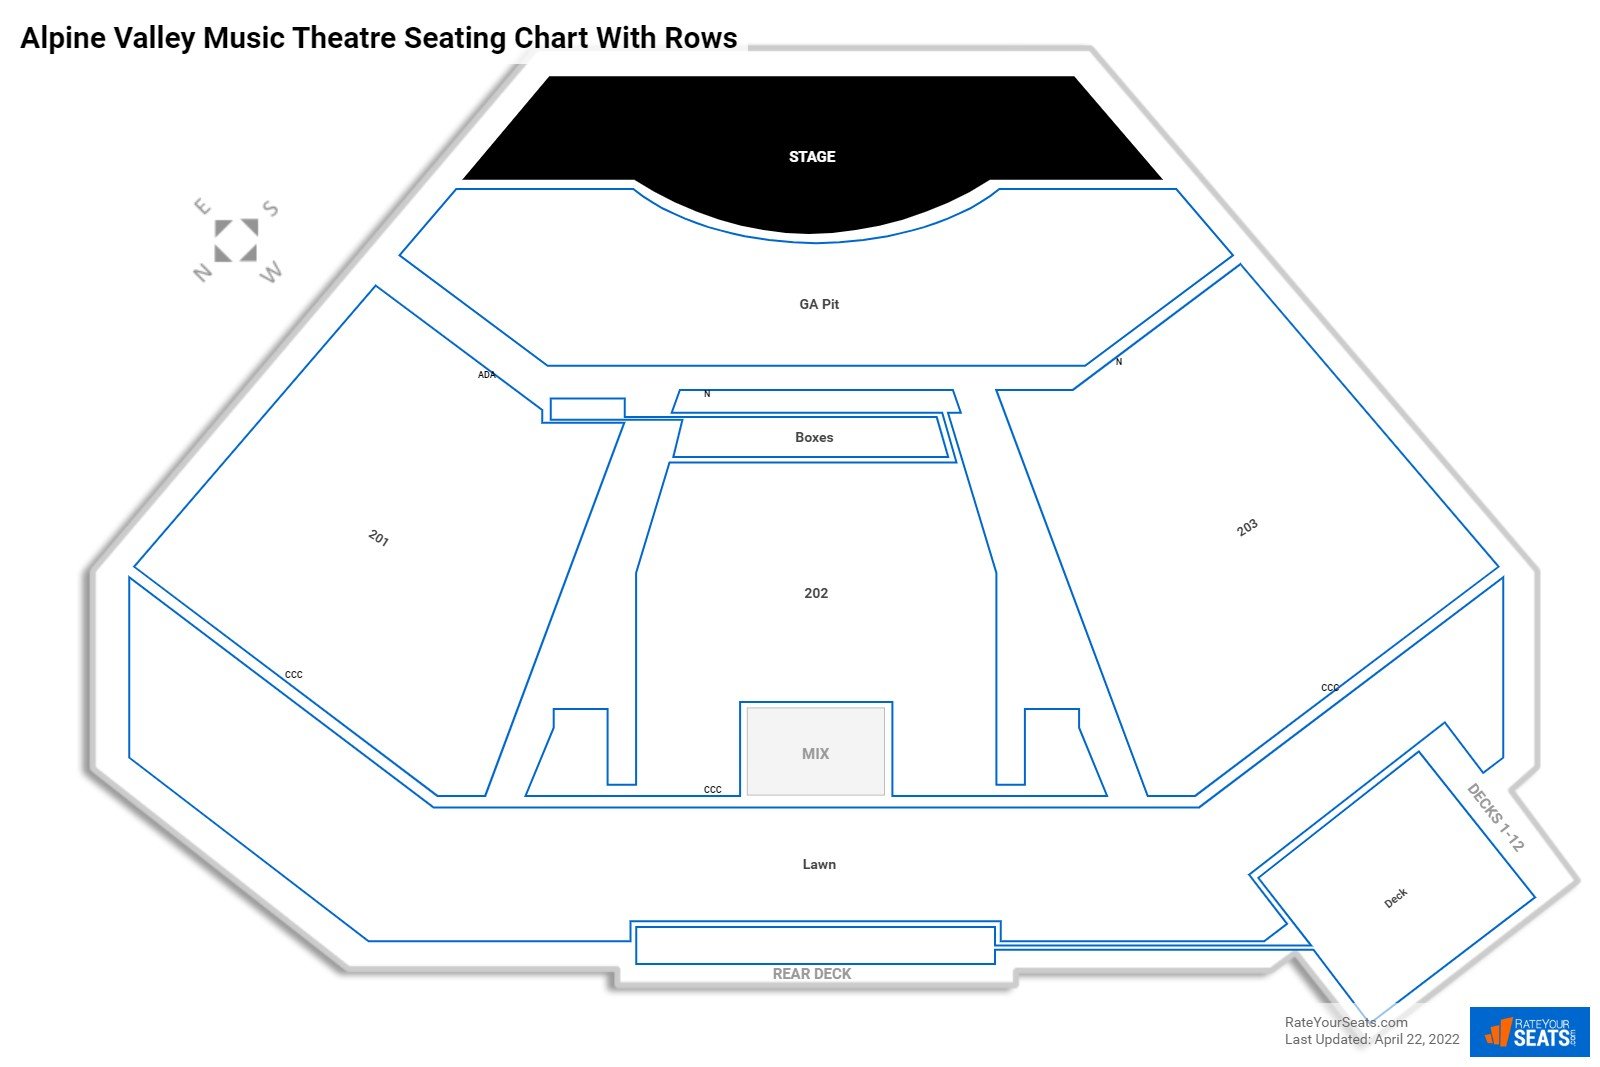 Alpine Valley Music Theatre seating chart with row numbers